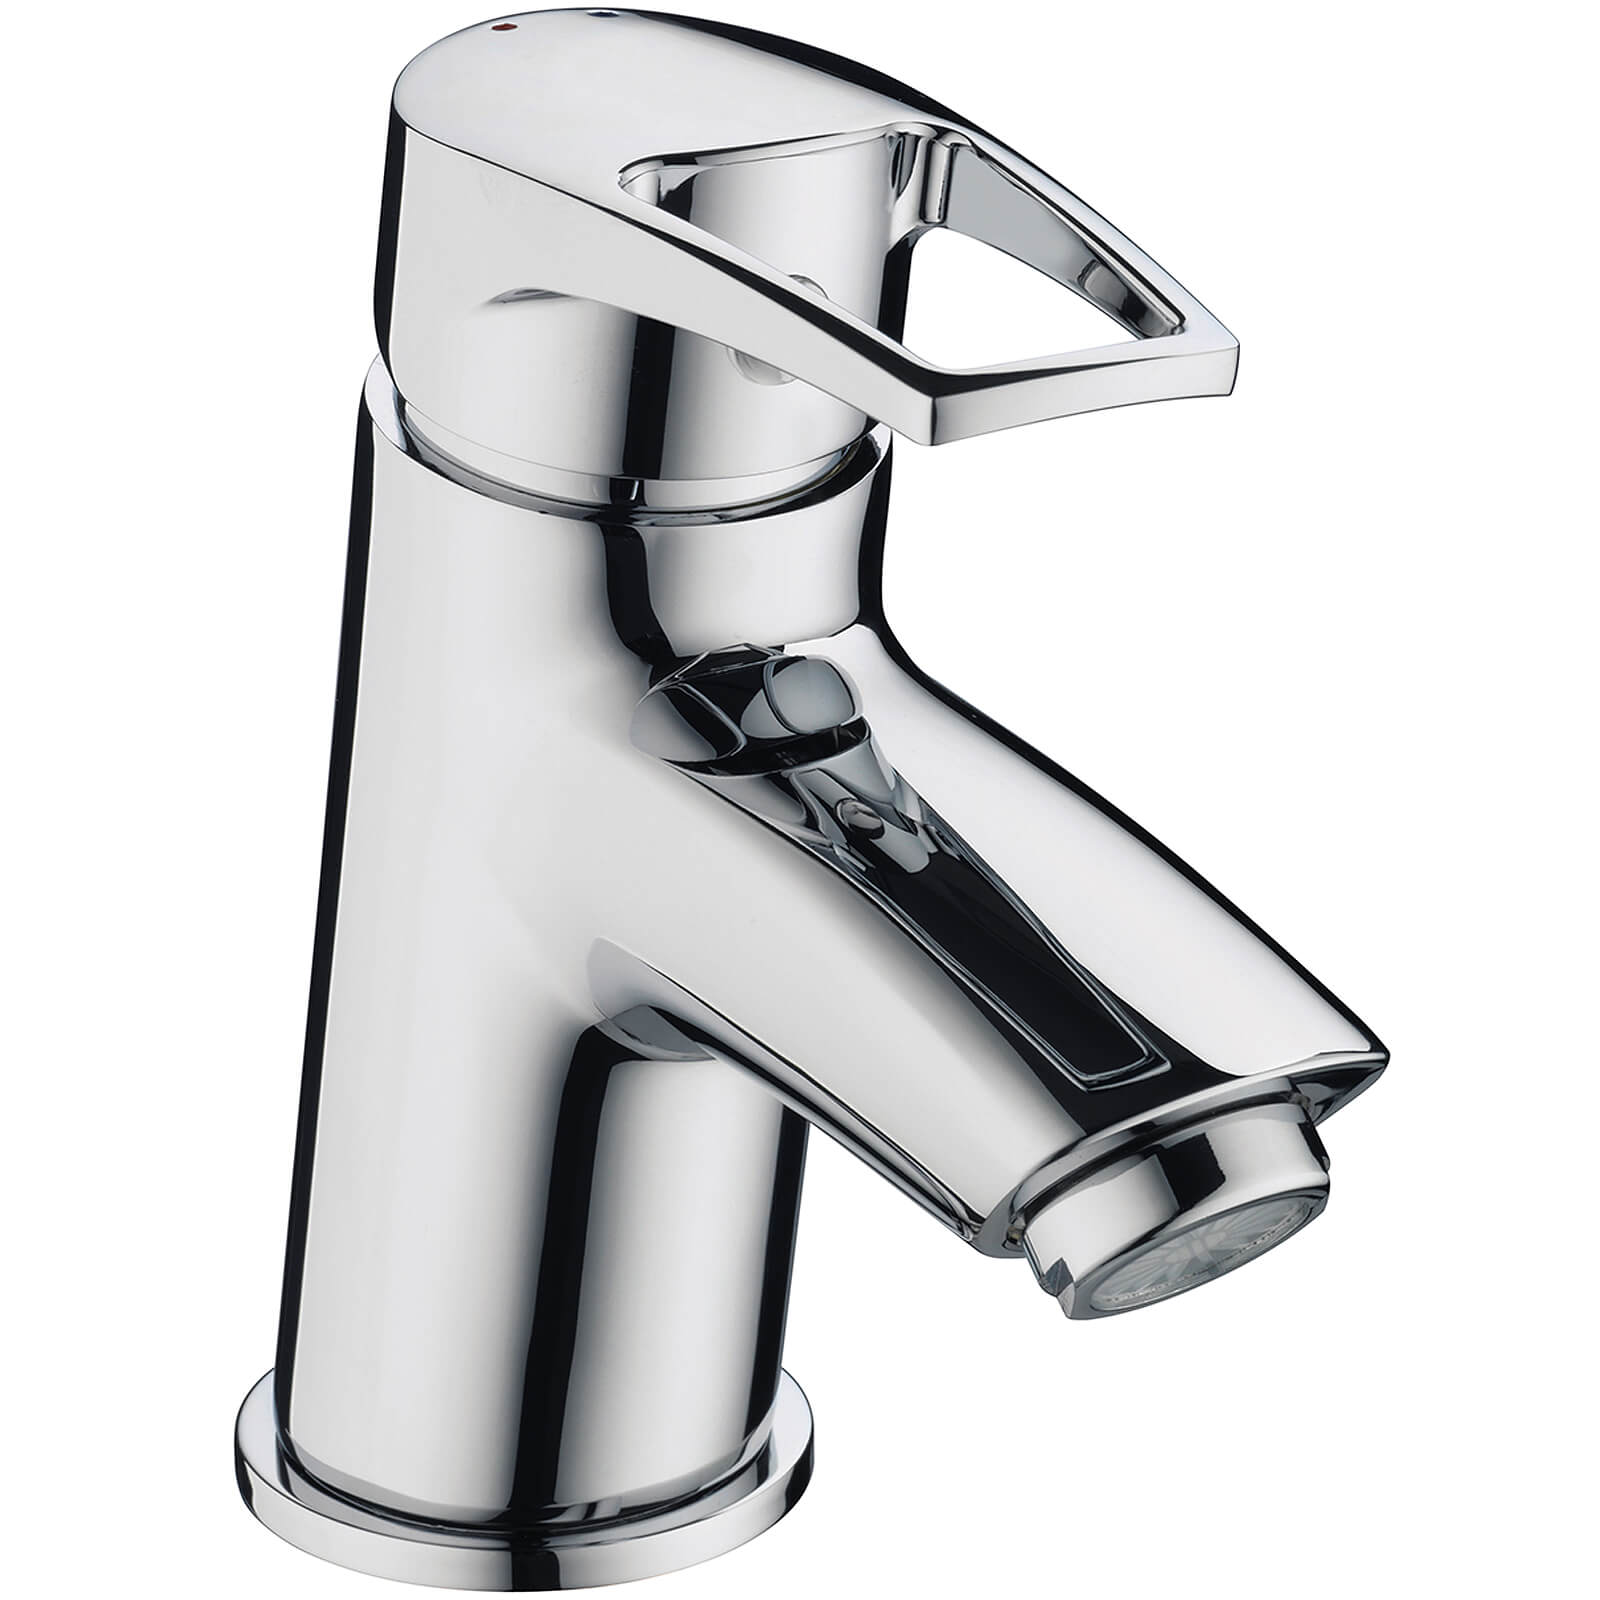 Bristan Smile Modern Basin Taps Hot & Cold Chrome Twin Pair Round Single Lever 